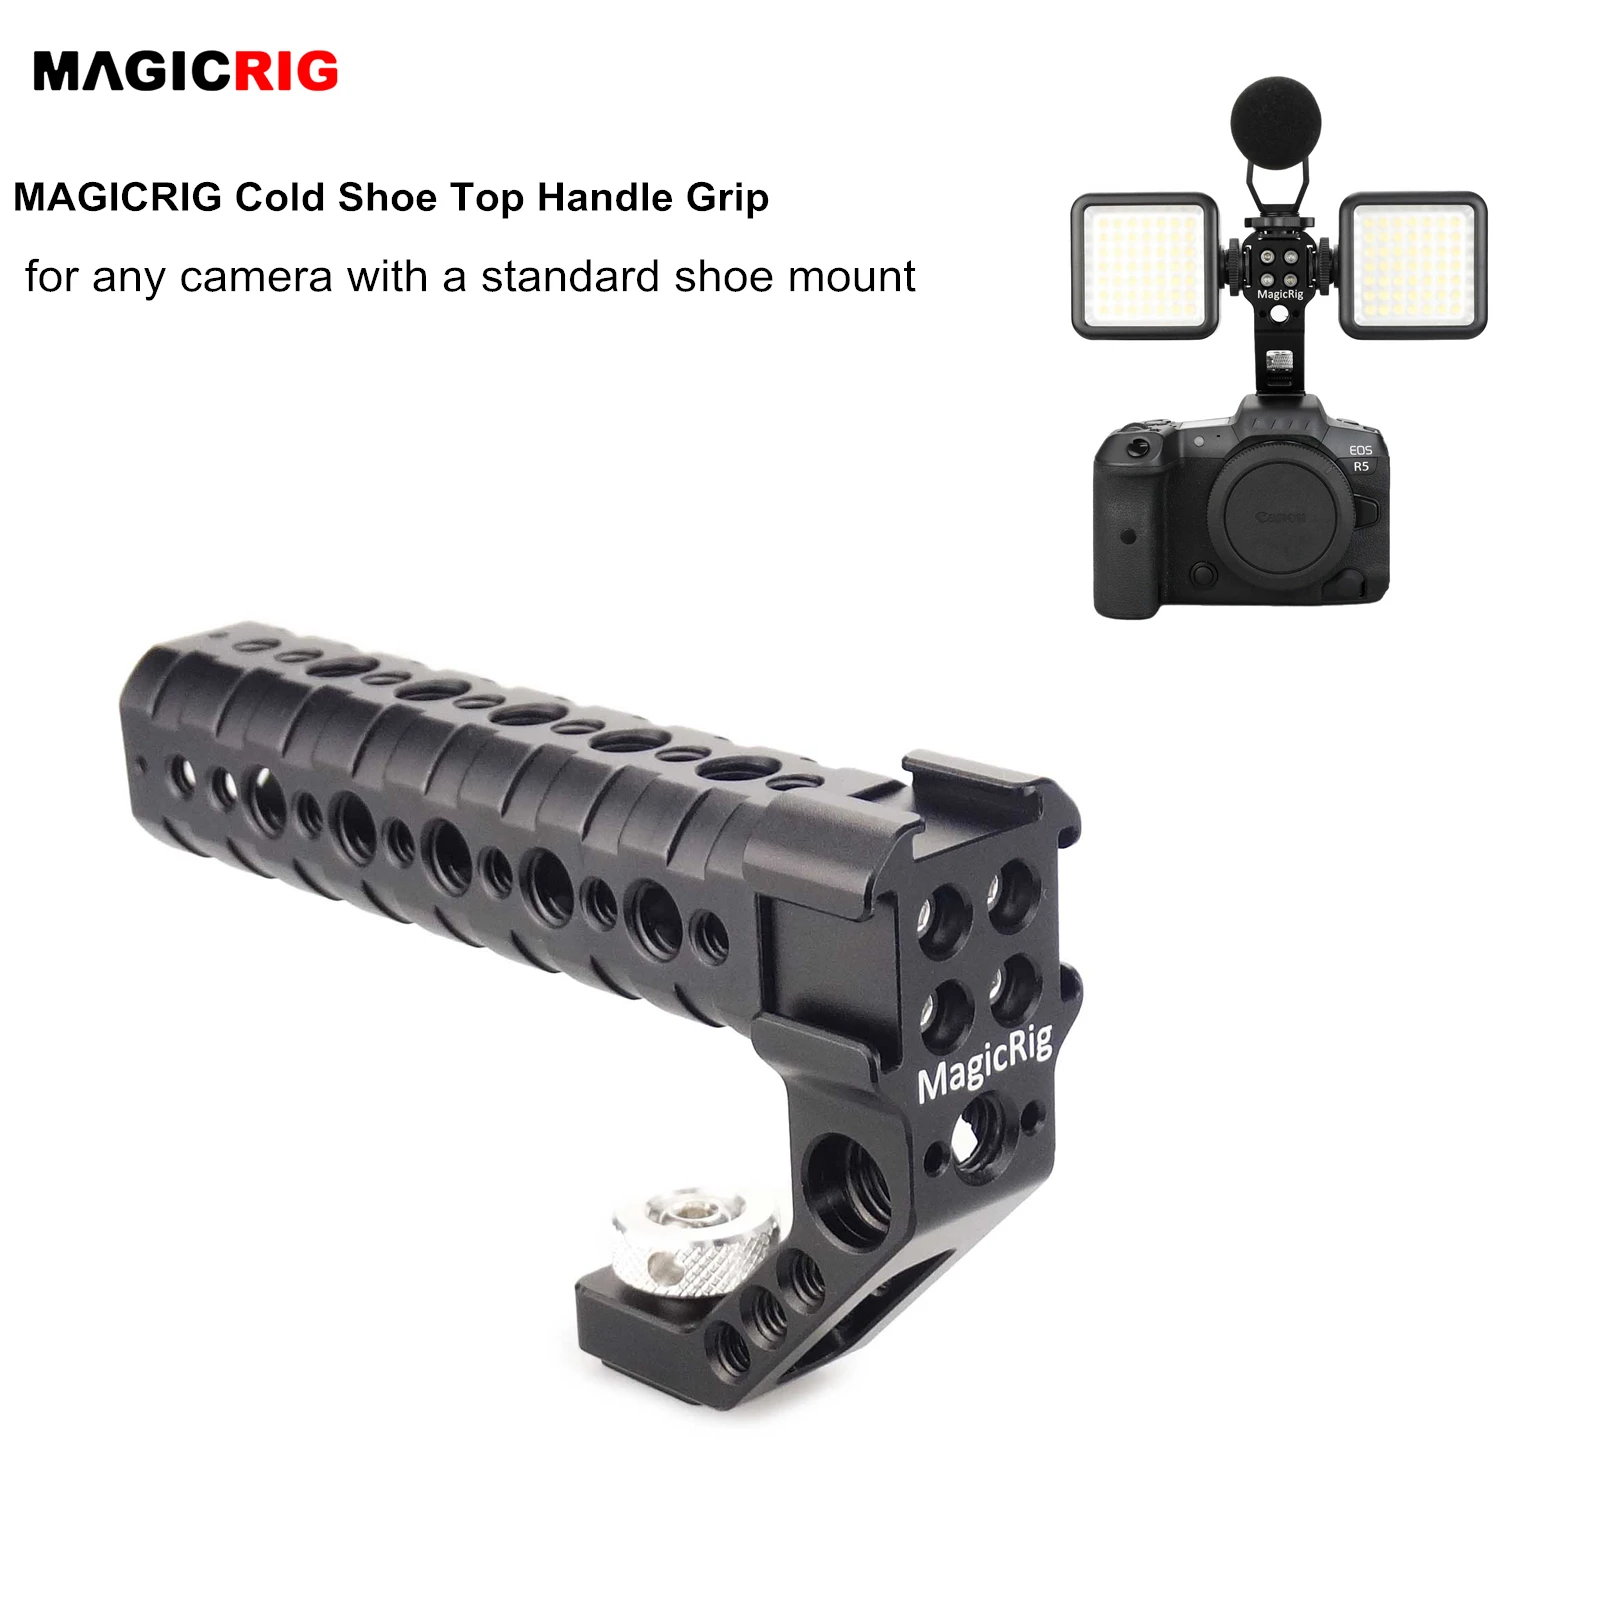 

MAGICRIG Cold Shoe Top Handle with 3 Cold Shoe Adapter Mounts for A7C A7RIII A7III A7SIII A6500 GH5 GH5S EOS R5 R6 M50 Camera